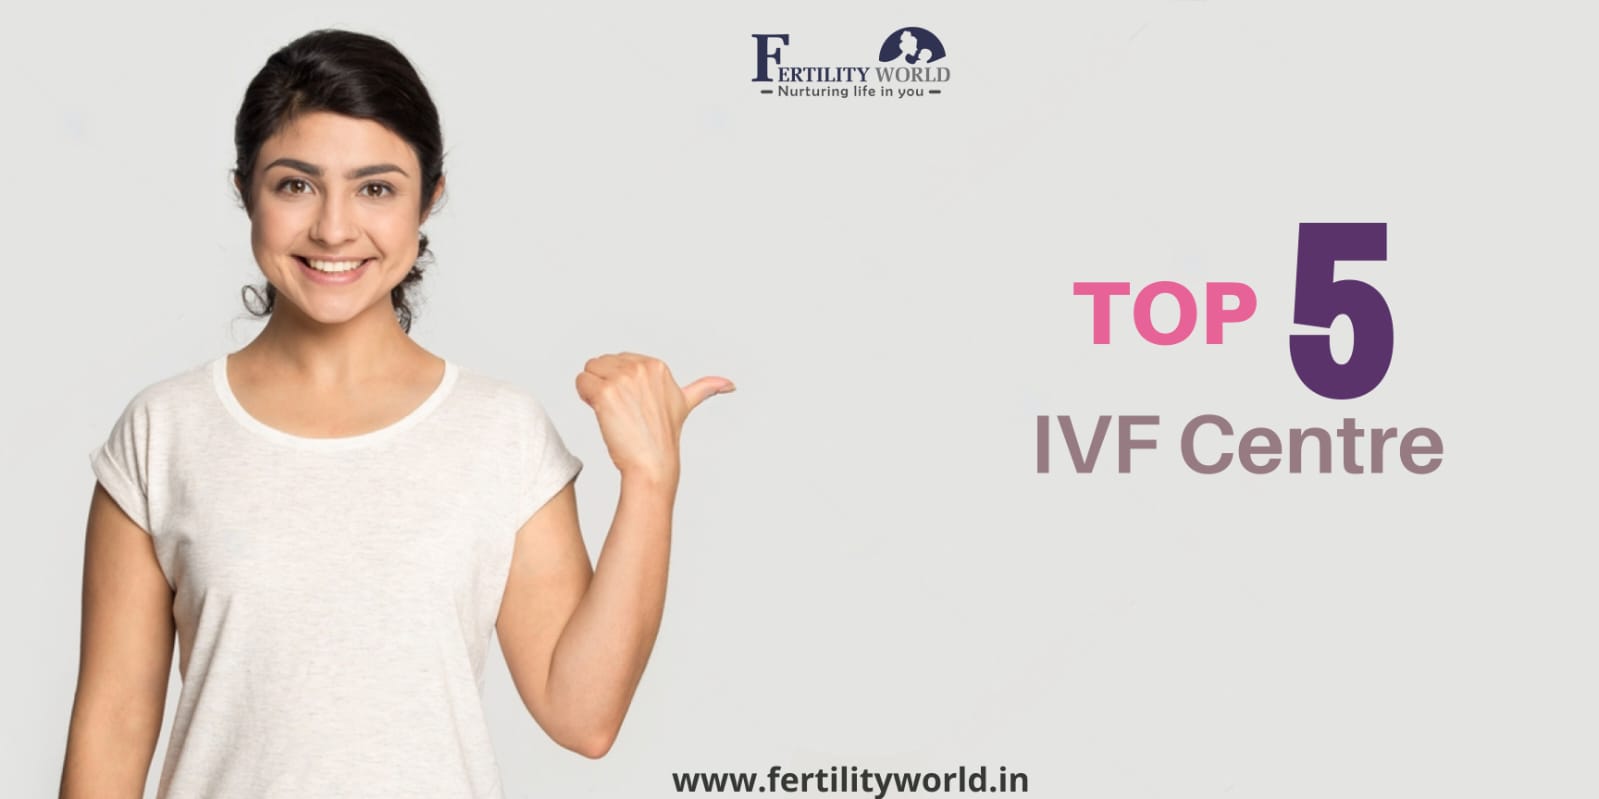 Top 5 IVF Centre in Chandigarh